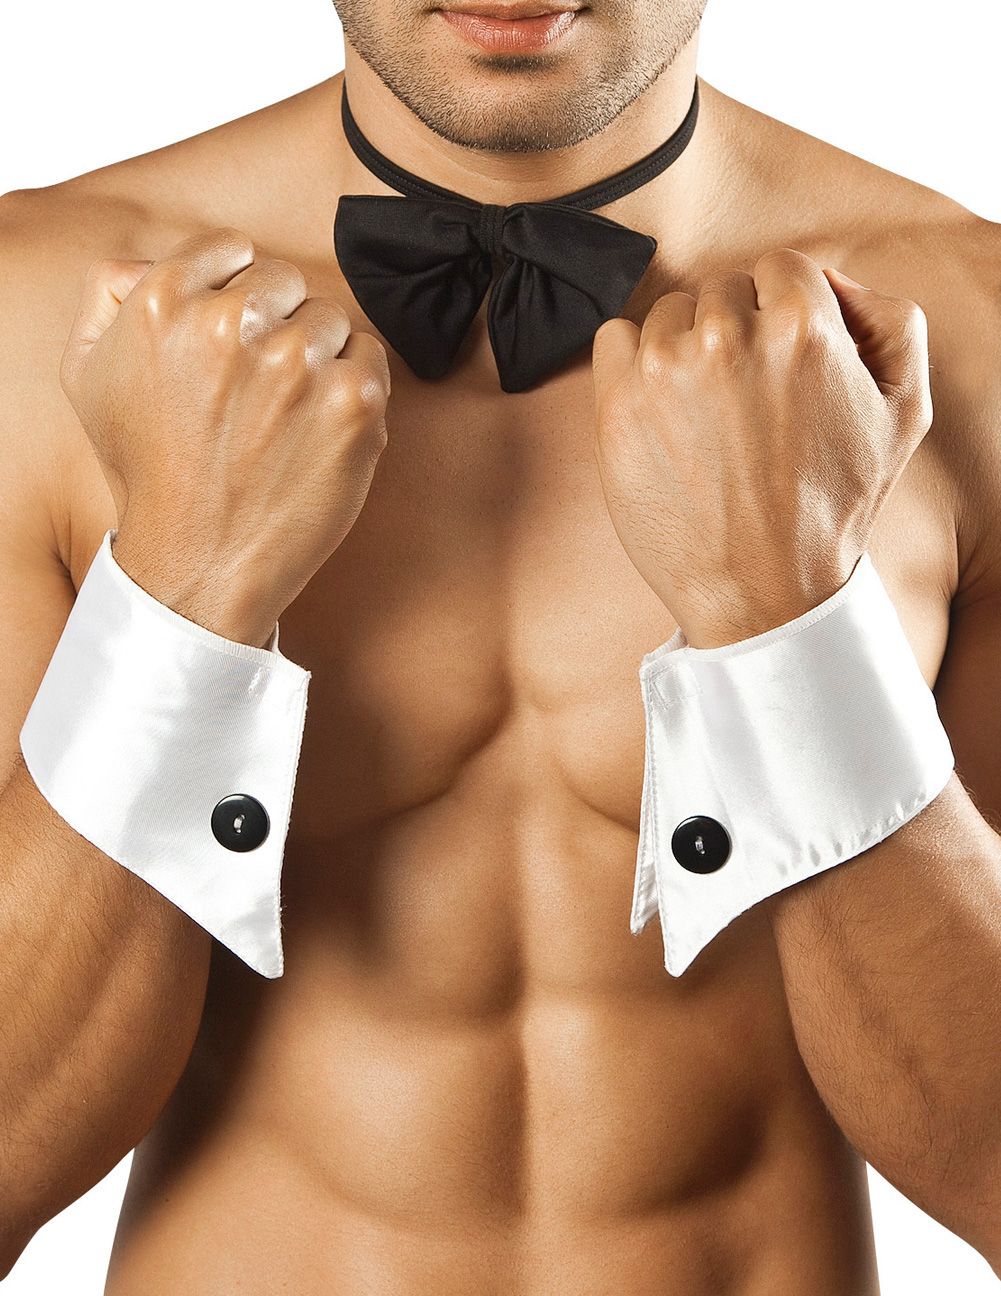 under-yours - Bowtie and Cuffs Only - CandyMan - Sexy Costumes